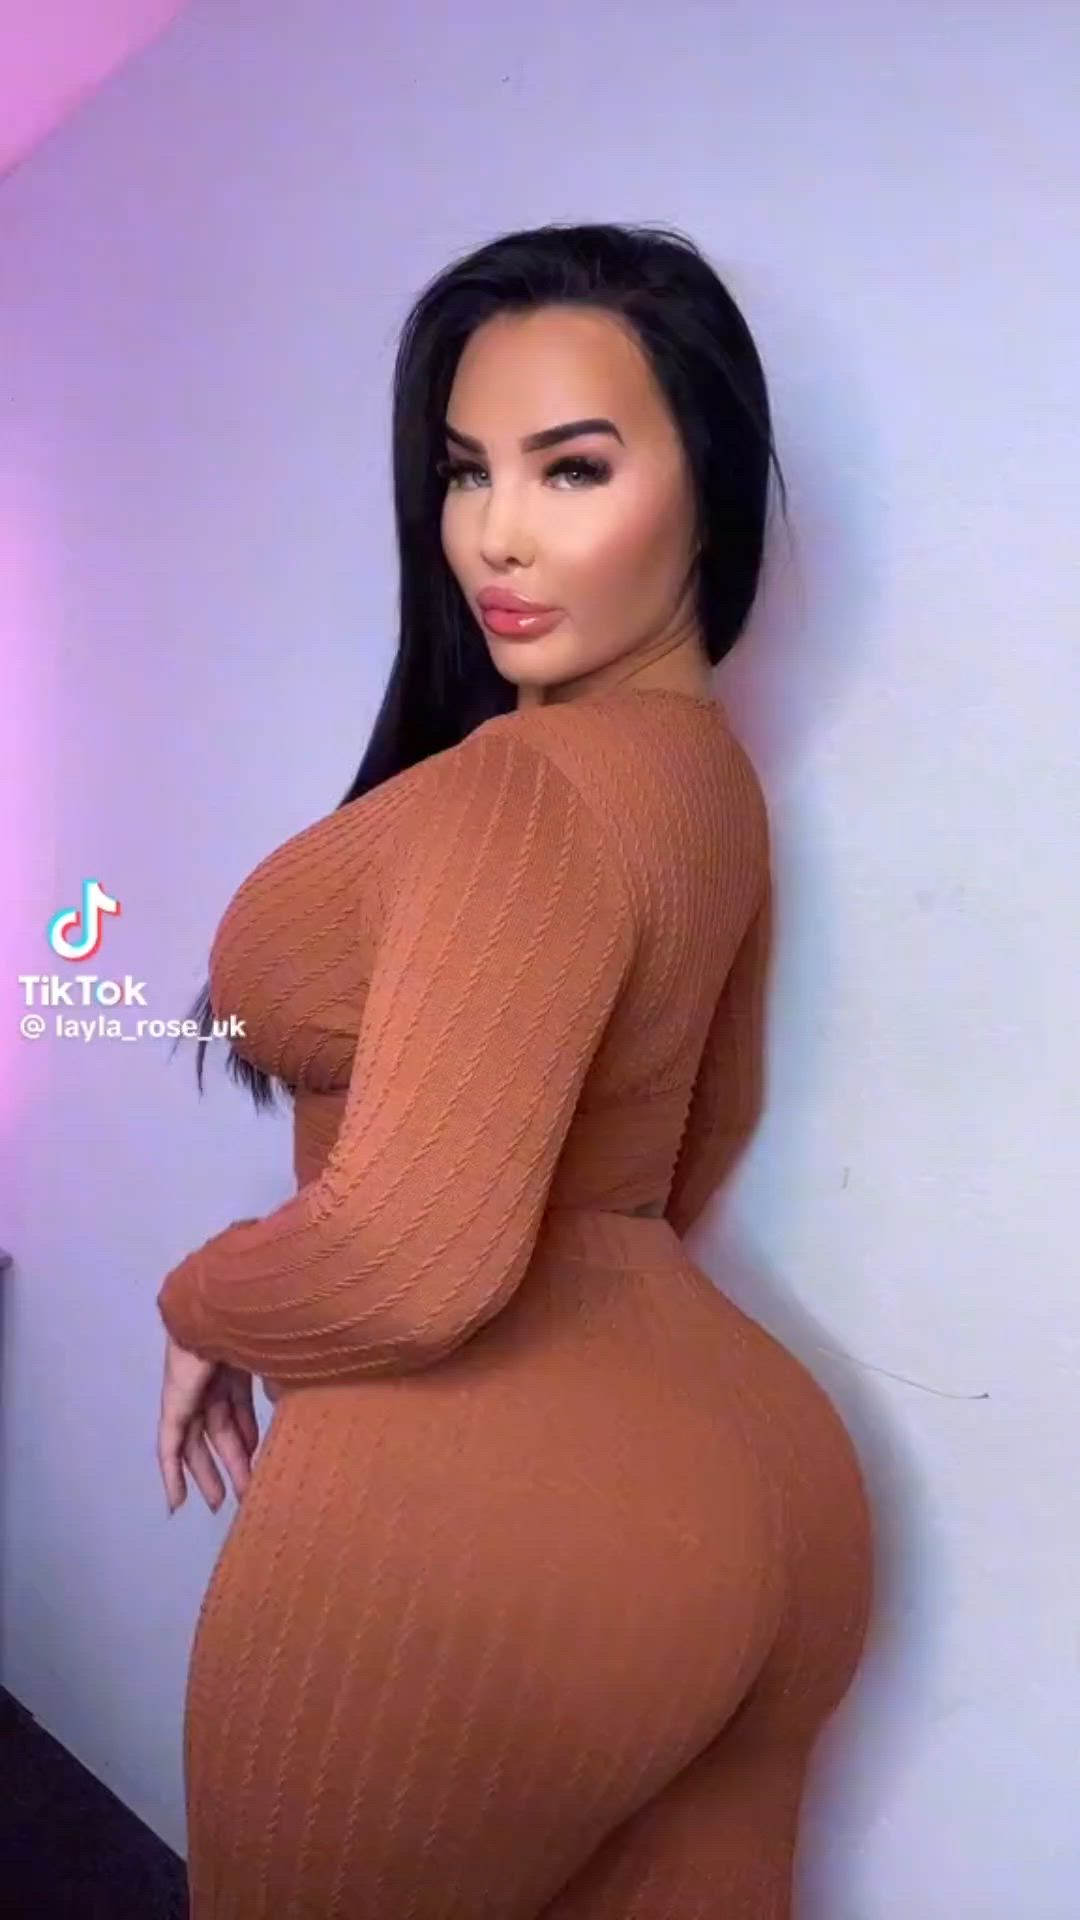 Ass porn video with onlyfans model Layla Rose ? <strong>@laylarosebstv</strong>